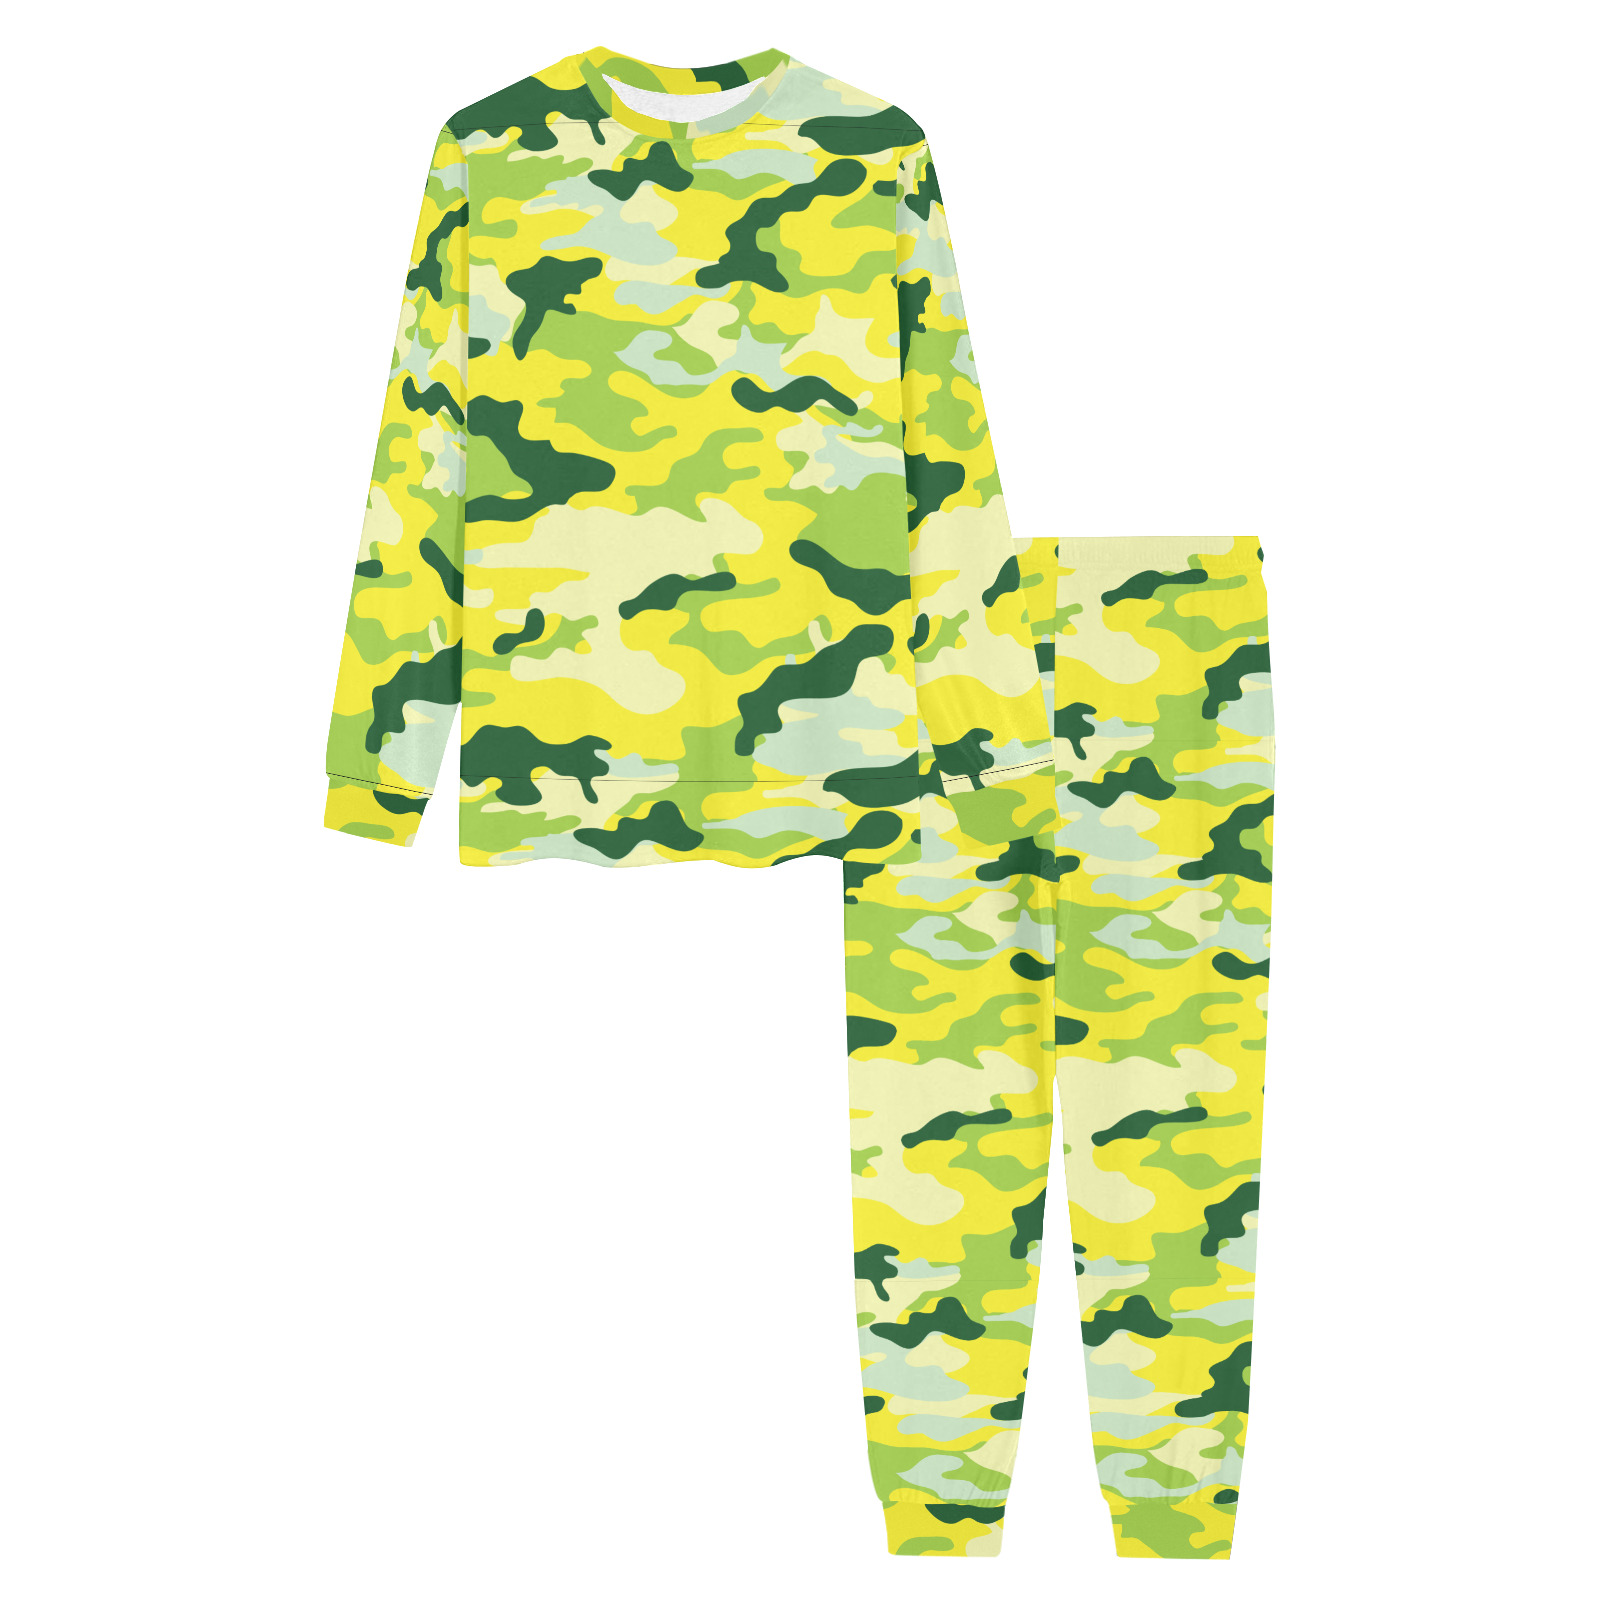 Streetwear Fashion Military Modern Army Camouflage Men's All Over Print Pajama Set with Custom Cuff